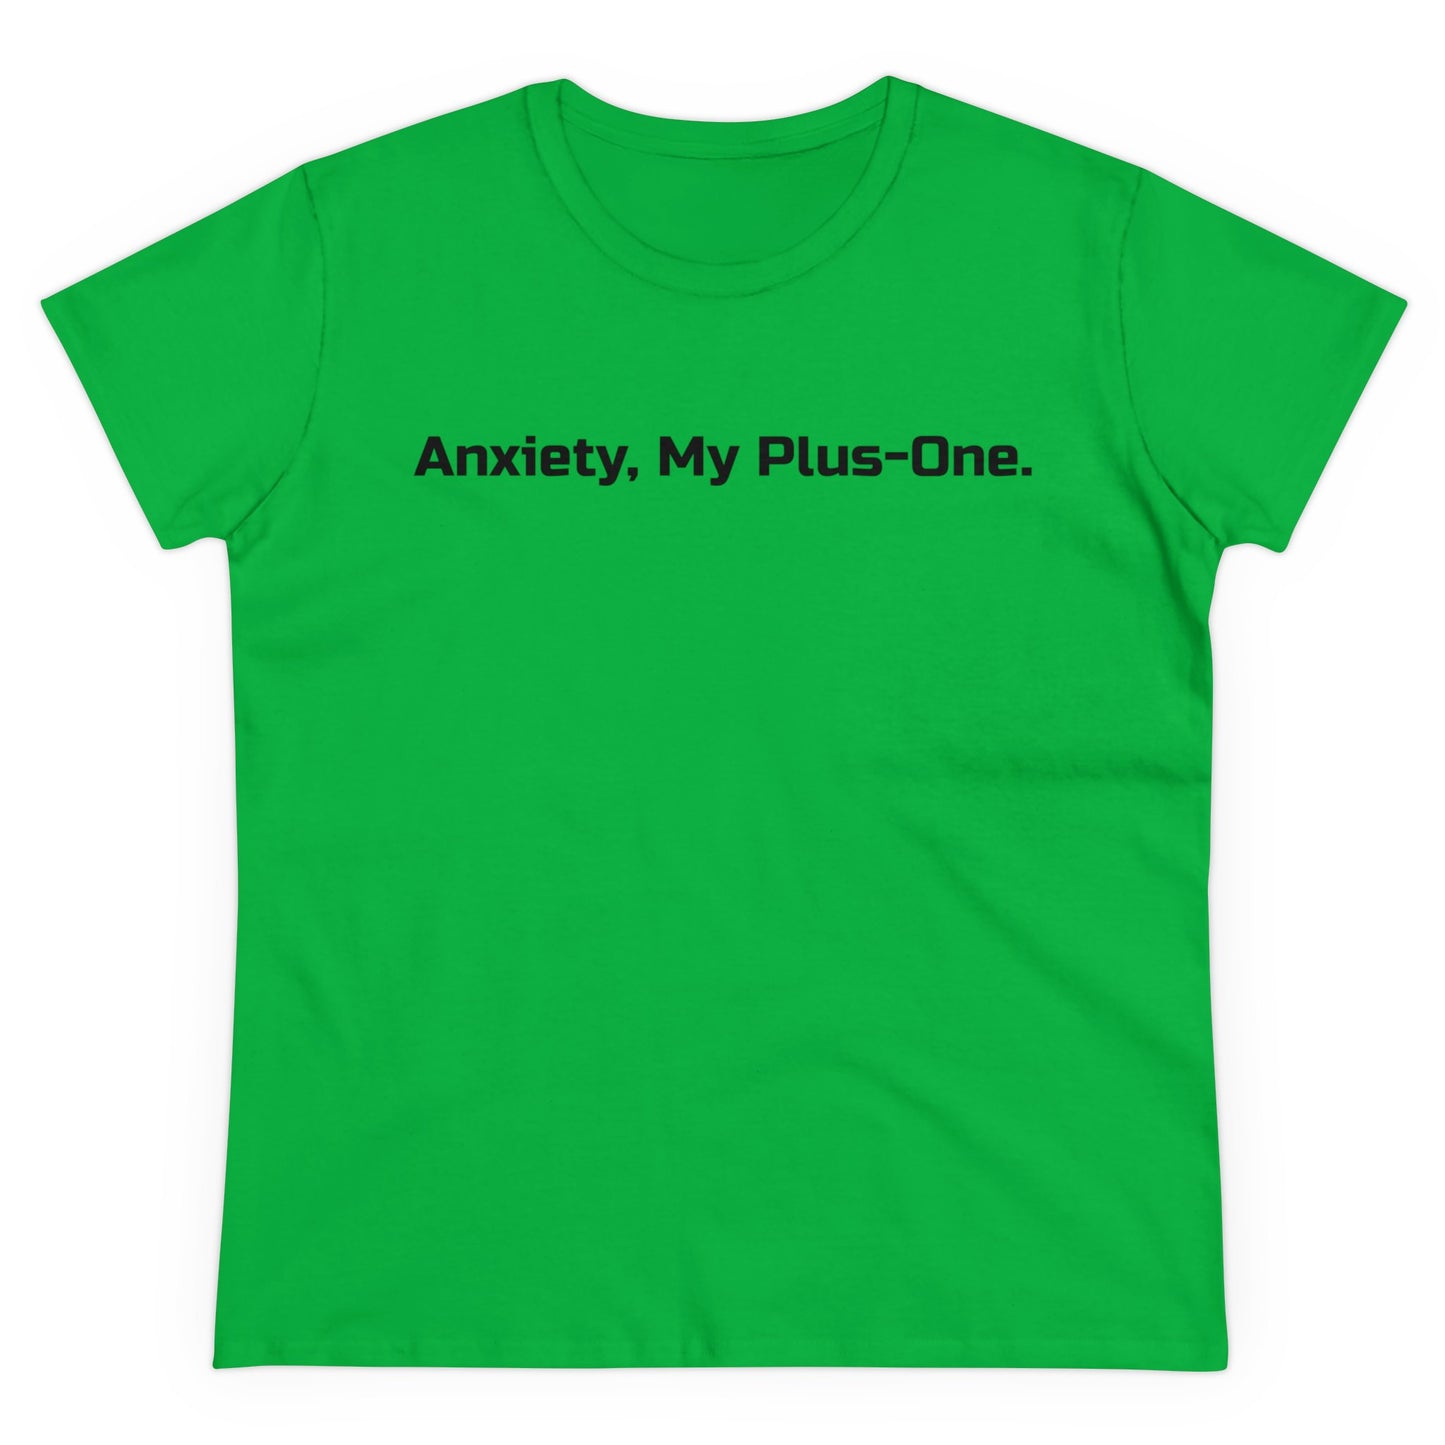 Anxiety Shirt, Anxiety My Plus One, Women's TShirt, Mental Health Shirt, Anxiety Relief Shirt, Anxiety Gift